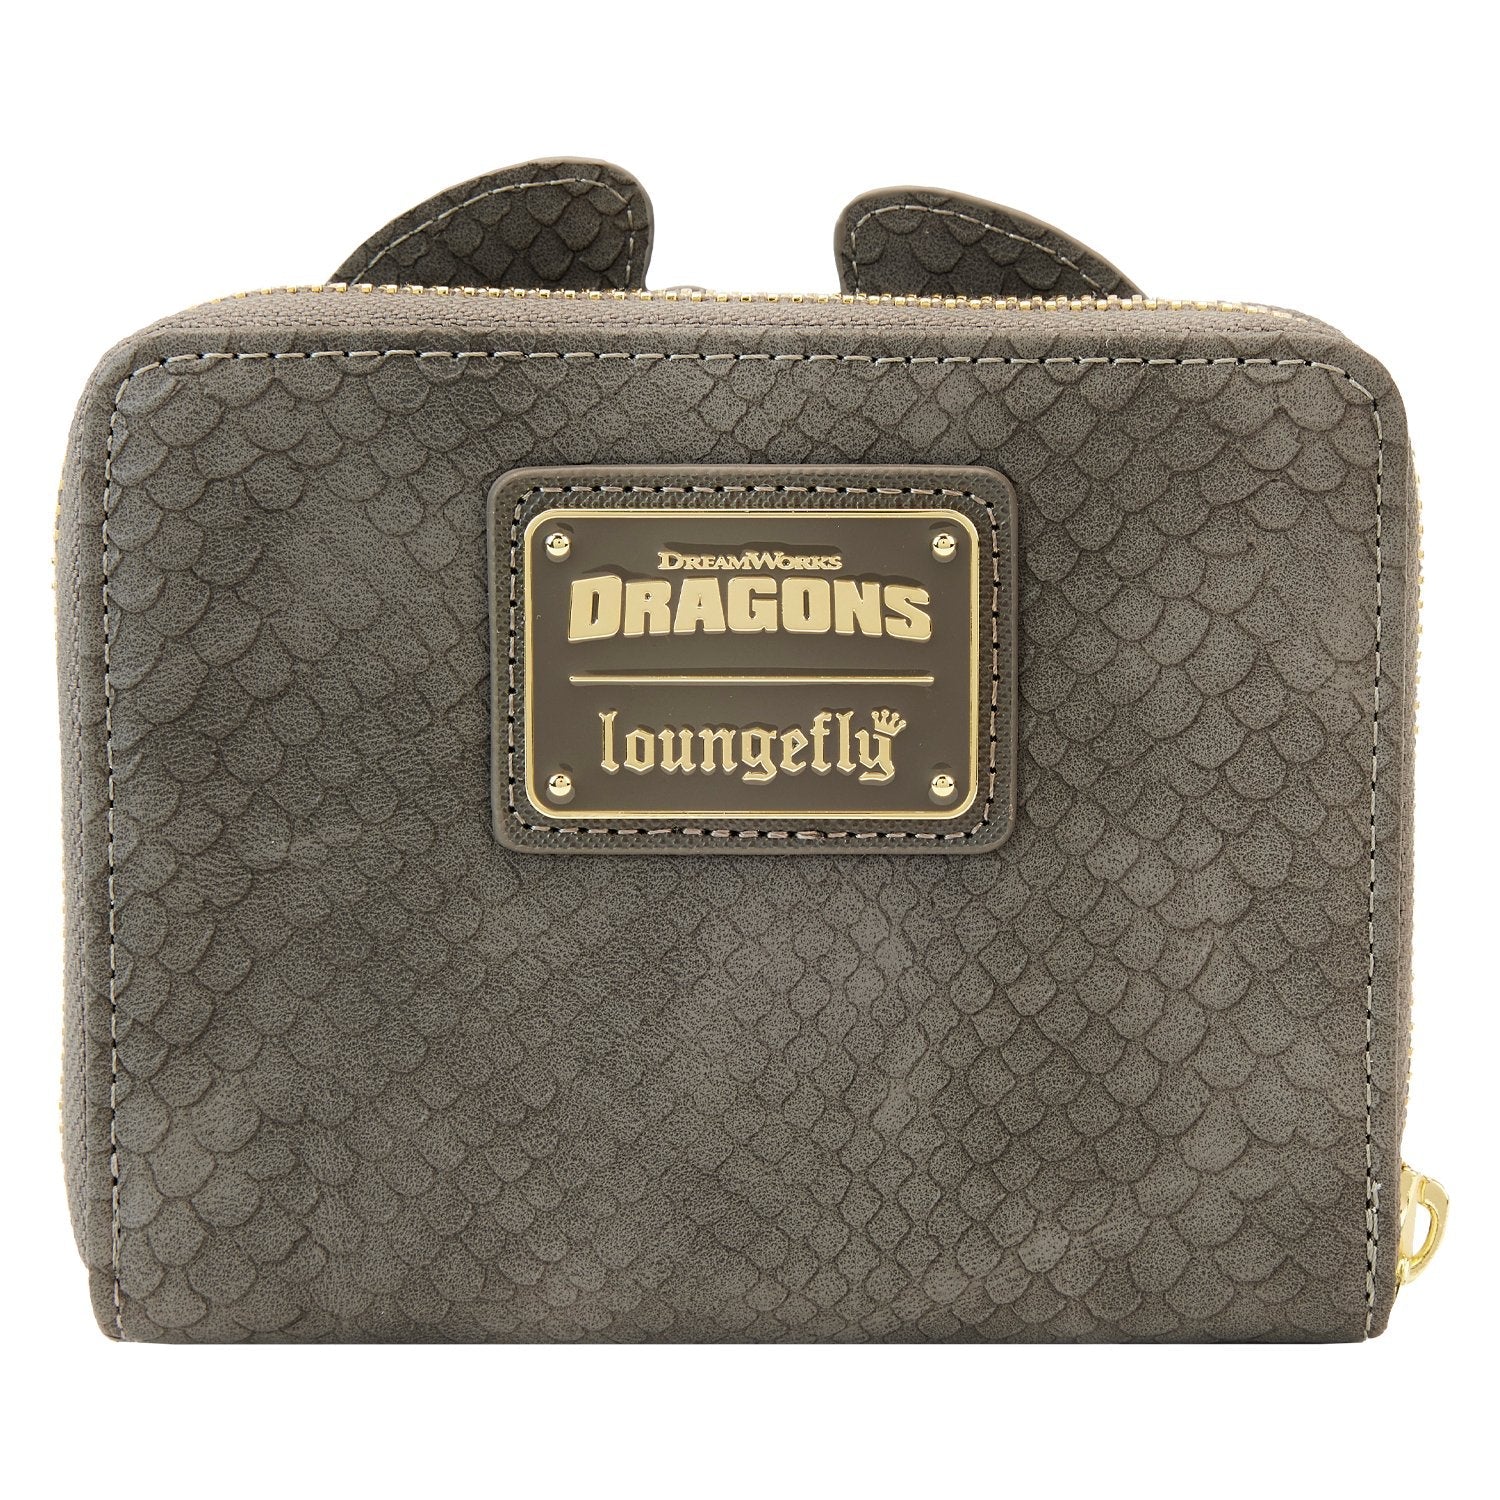 Dreamworks How to Train Your Dragon Toothless Cosplay Zip Around Wallet - Loungefly - 2